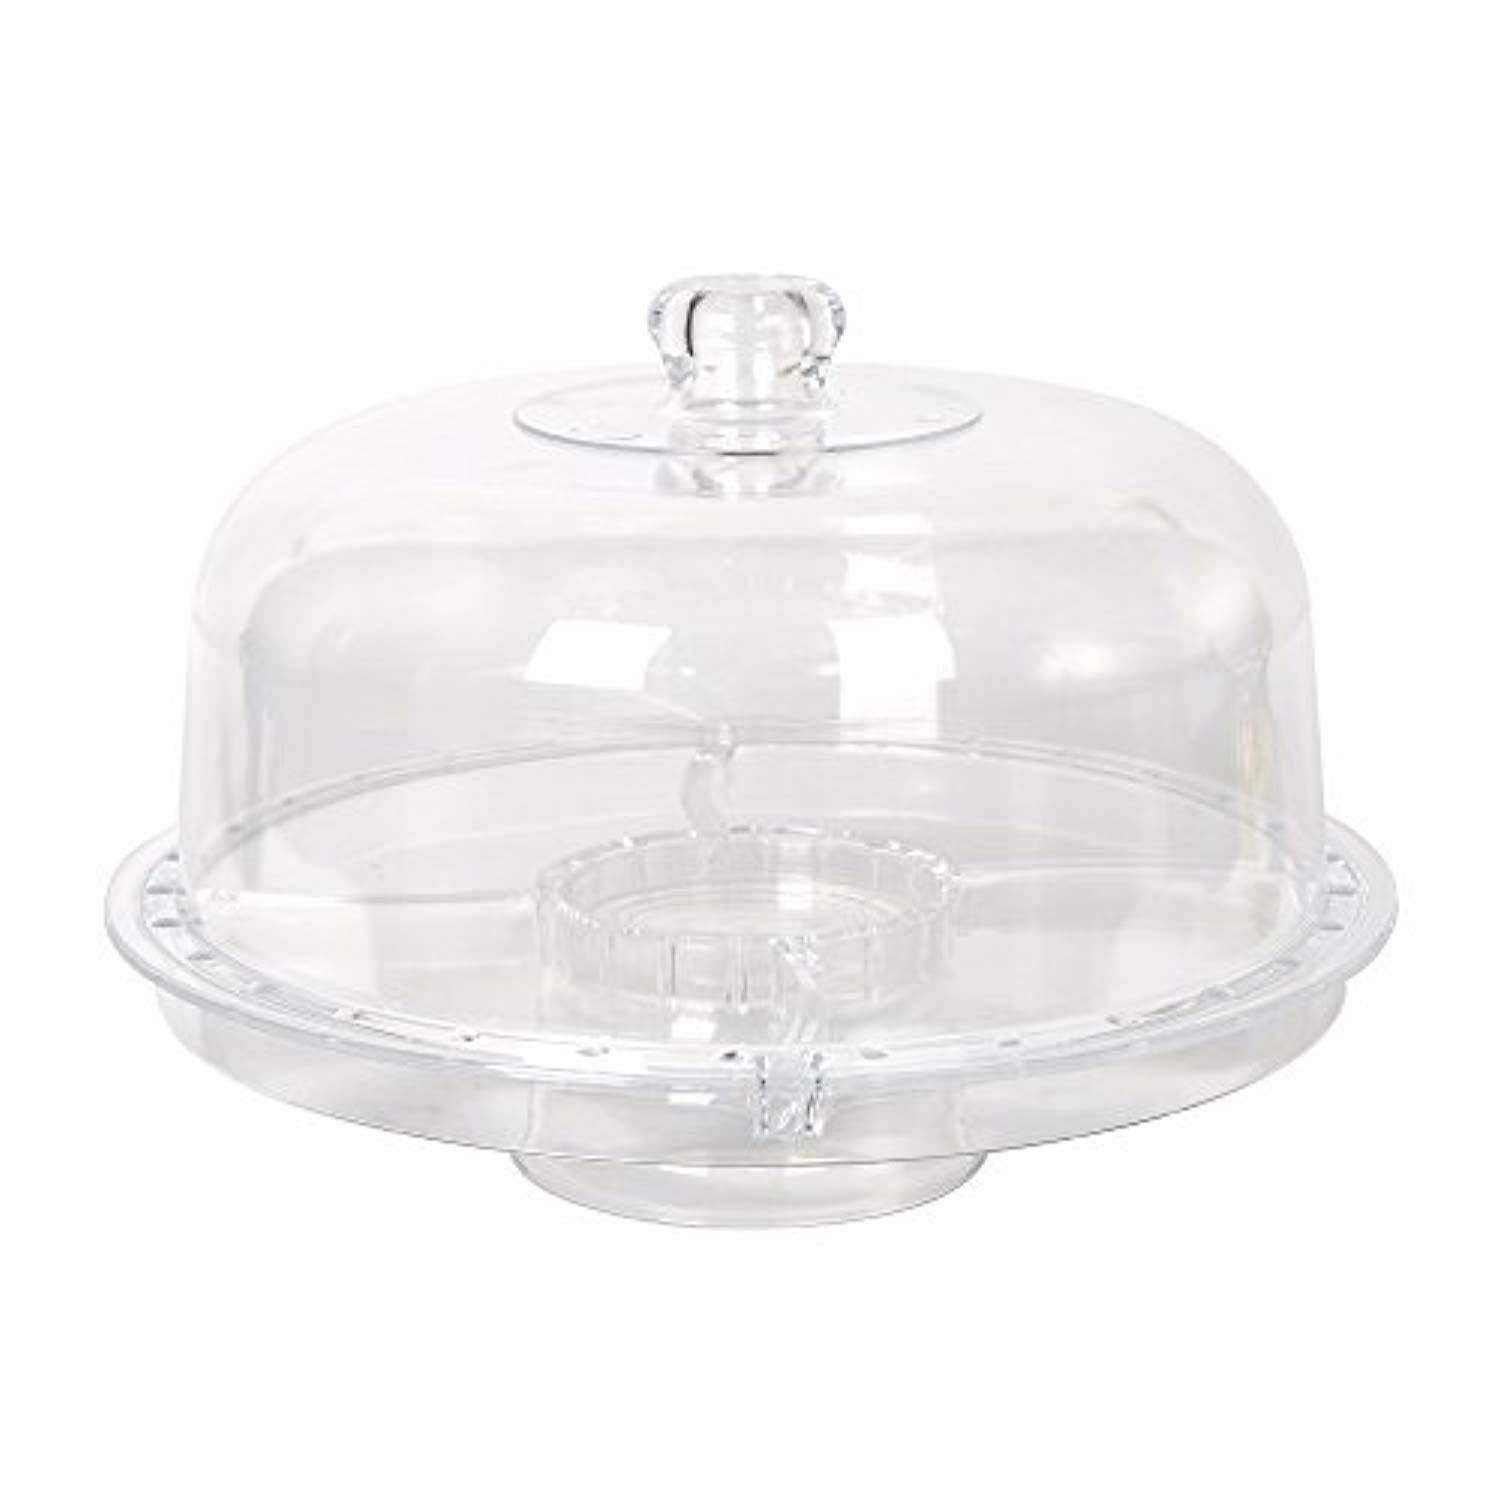 Bosonshop 6 in 1 Multifunctional Serving Platter and Cake Plate, Salad & Punch Bowl,Clear Acrylic, 12"